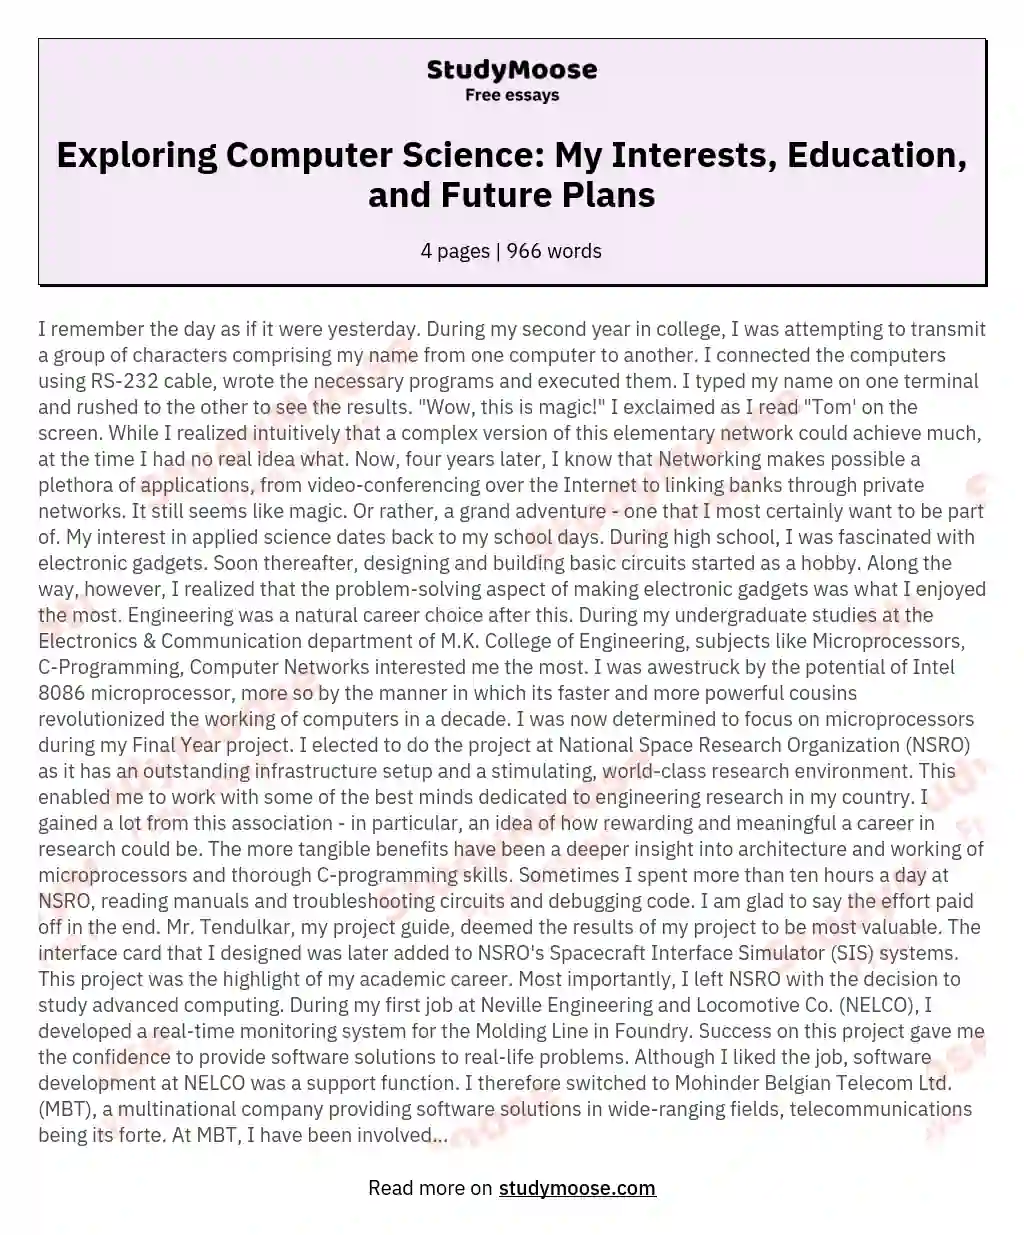 Exploring Computer Science: My Interests, Education, and Future Plans essay